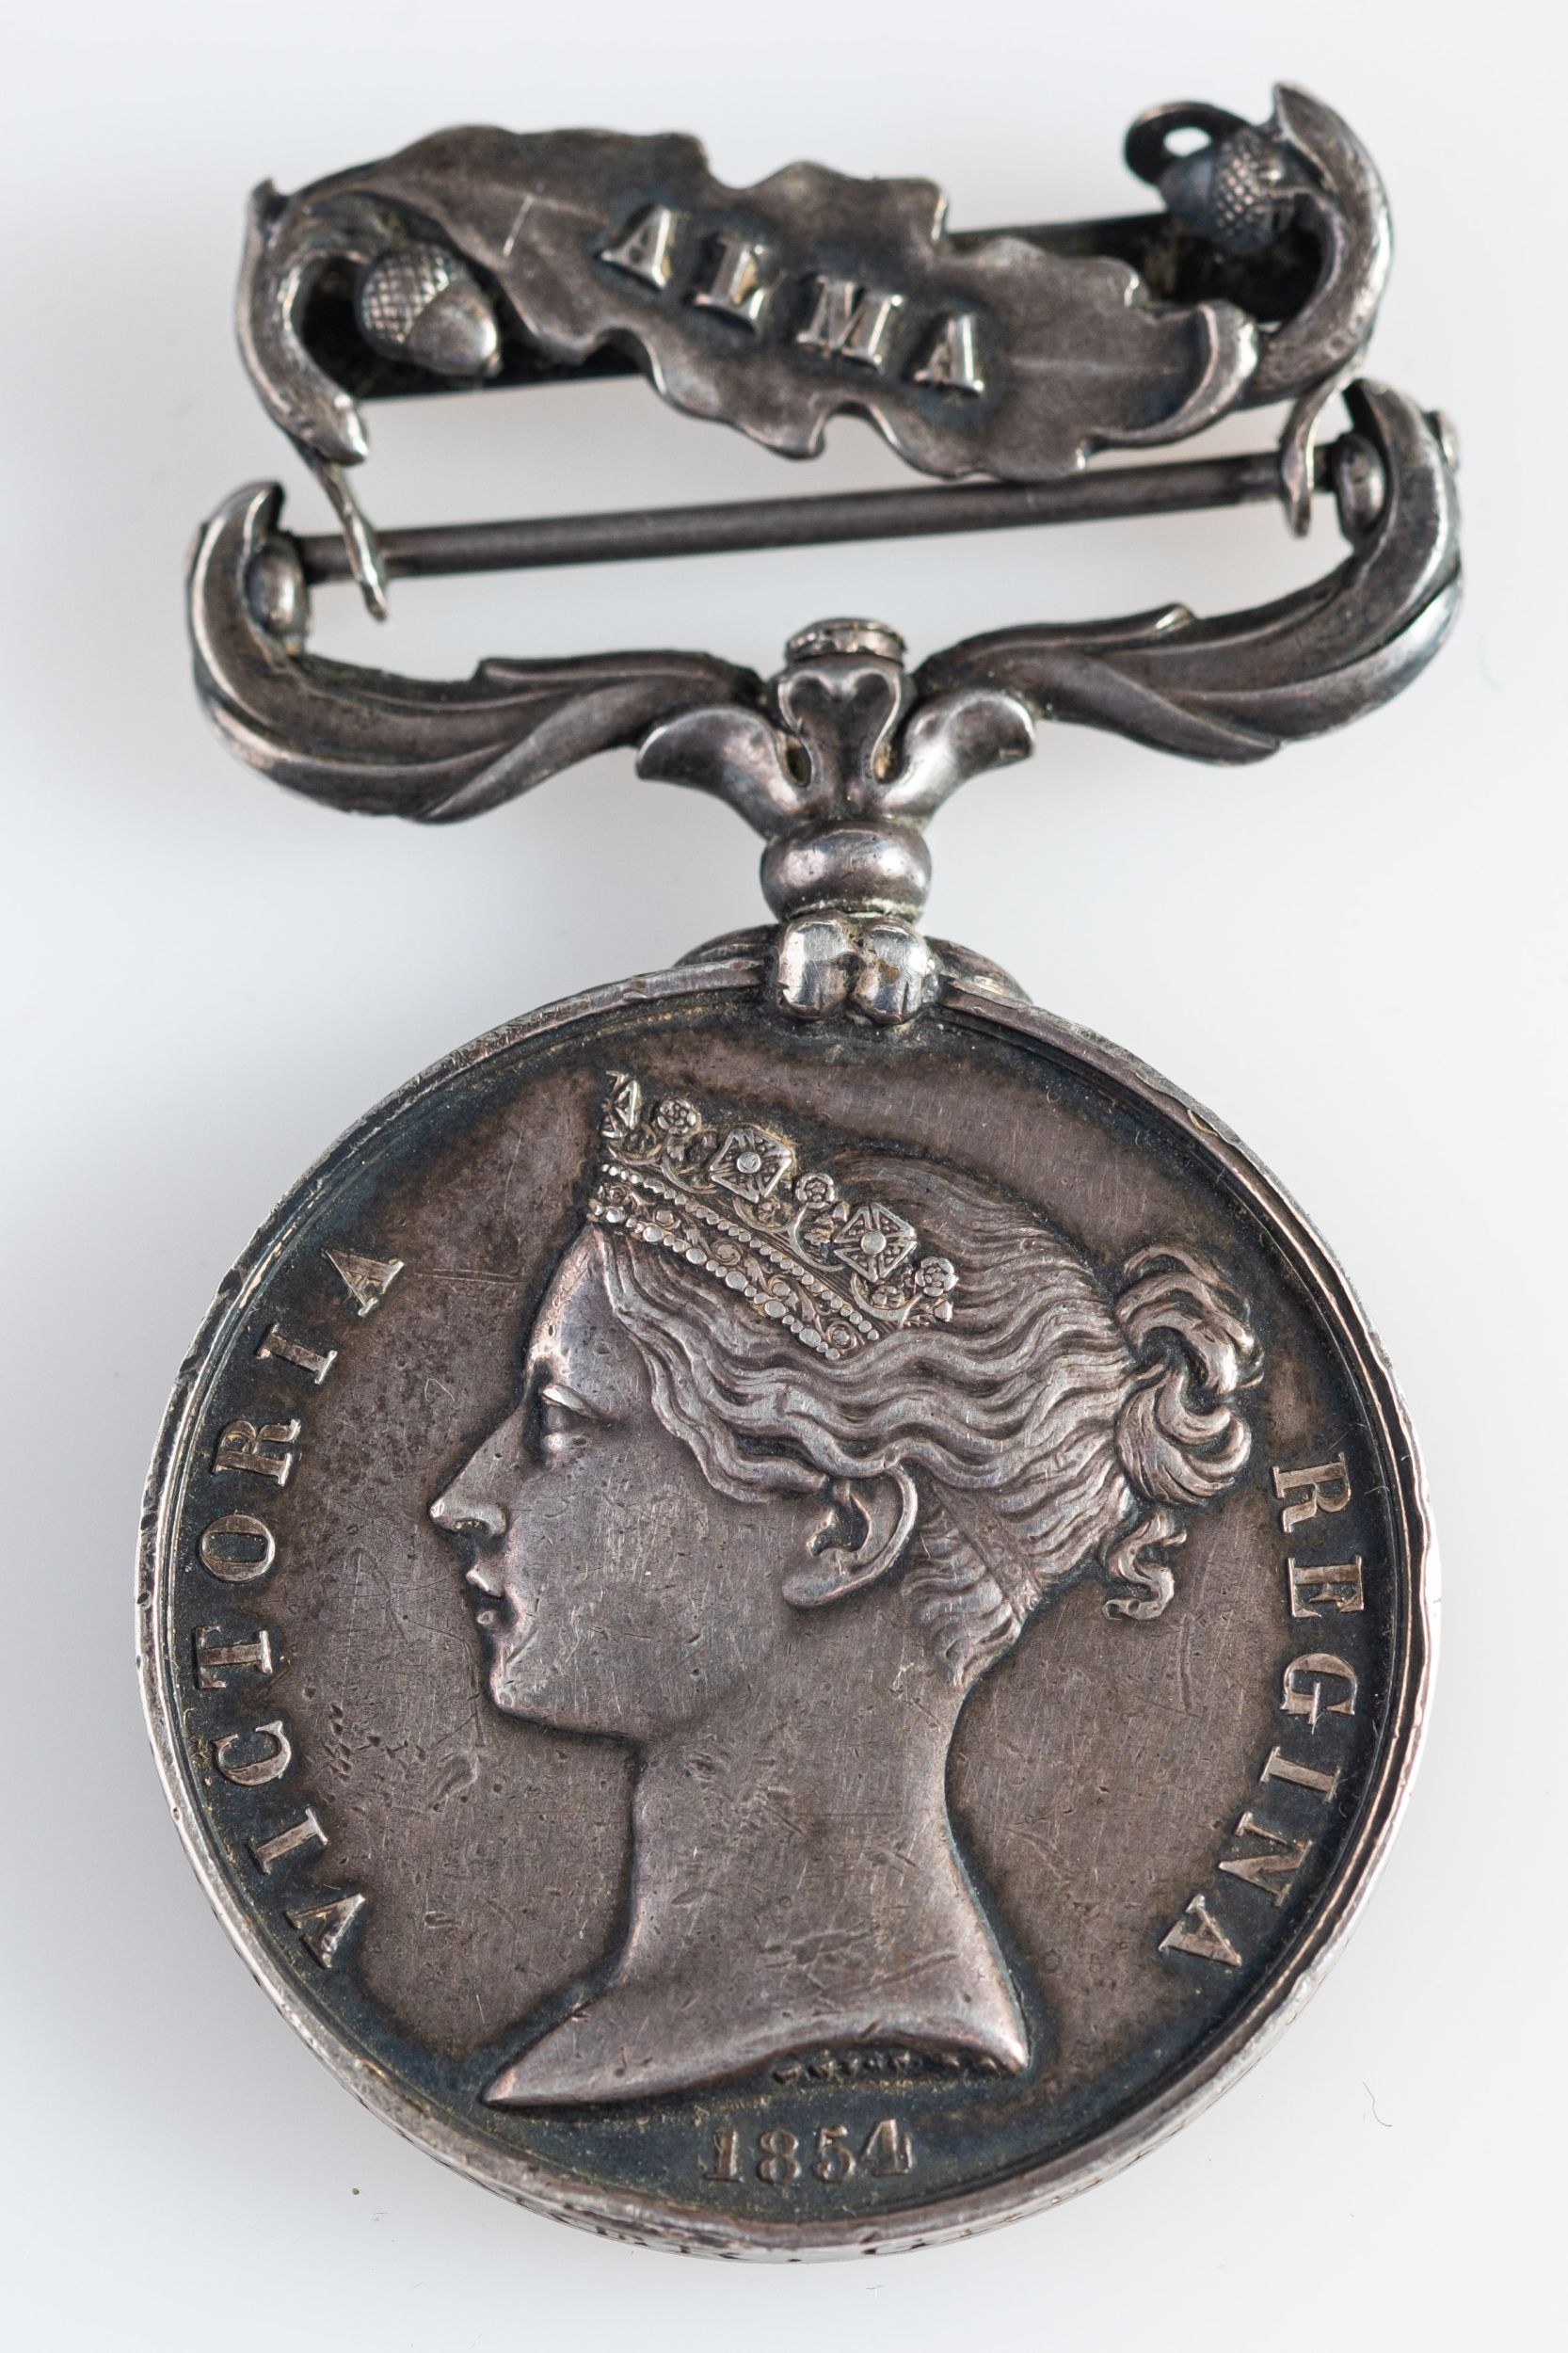 A Crimea Medal with Alma clasp to 'Private Robt Baker Grenr Guards'.